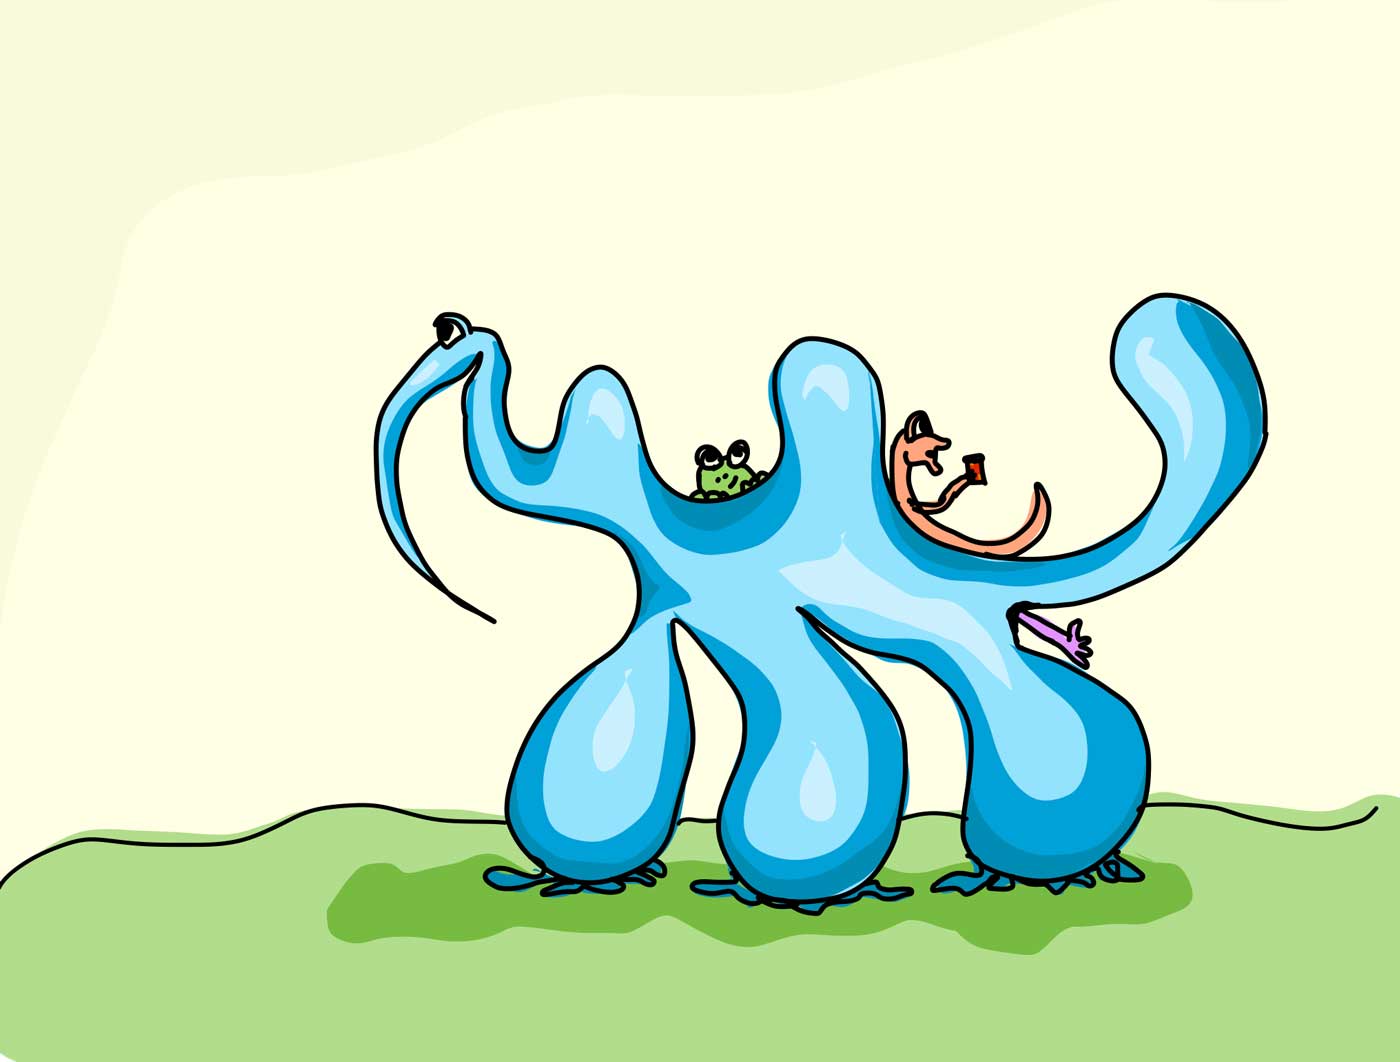 A blue monster with humps and smaller monsters riding on its back